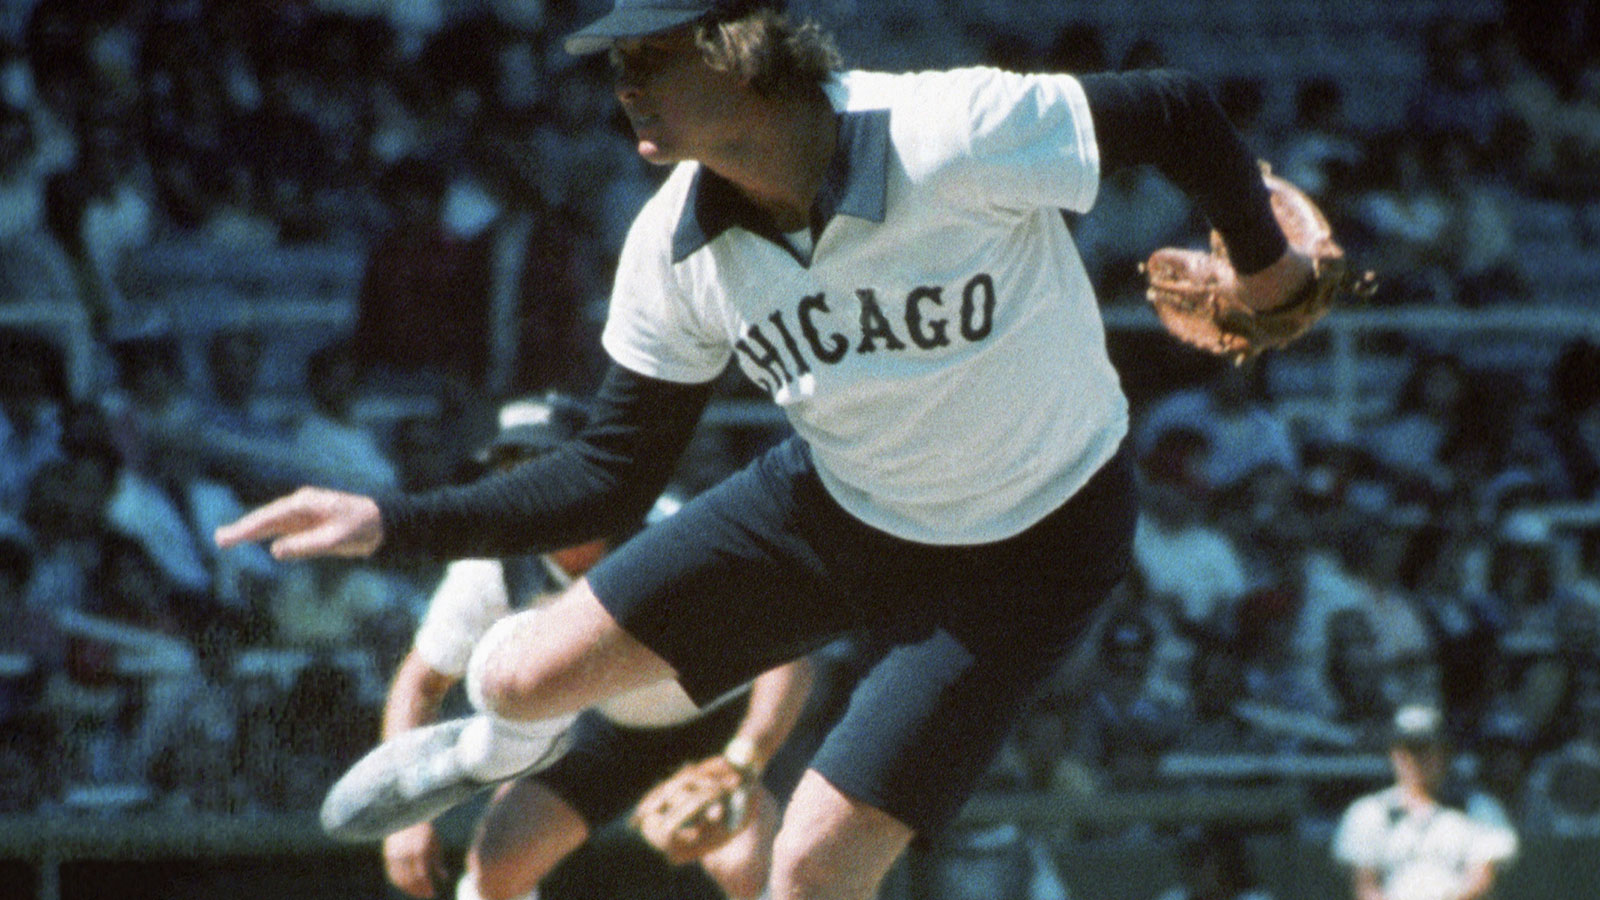 white sox uniforms with shorts